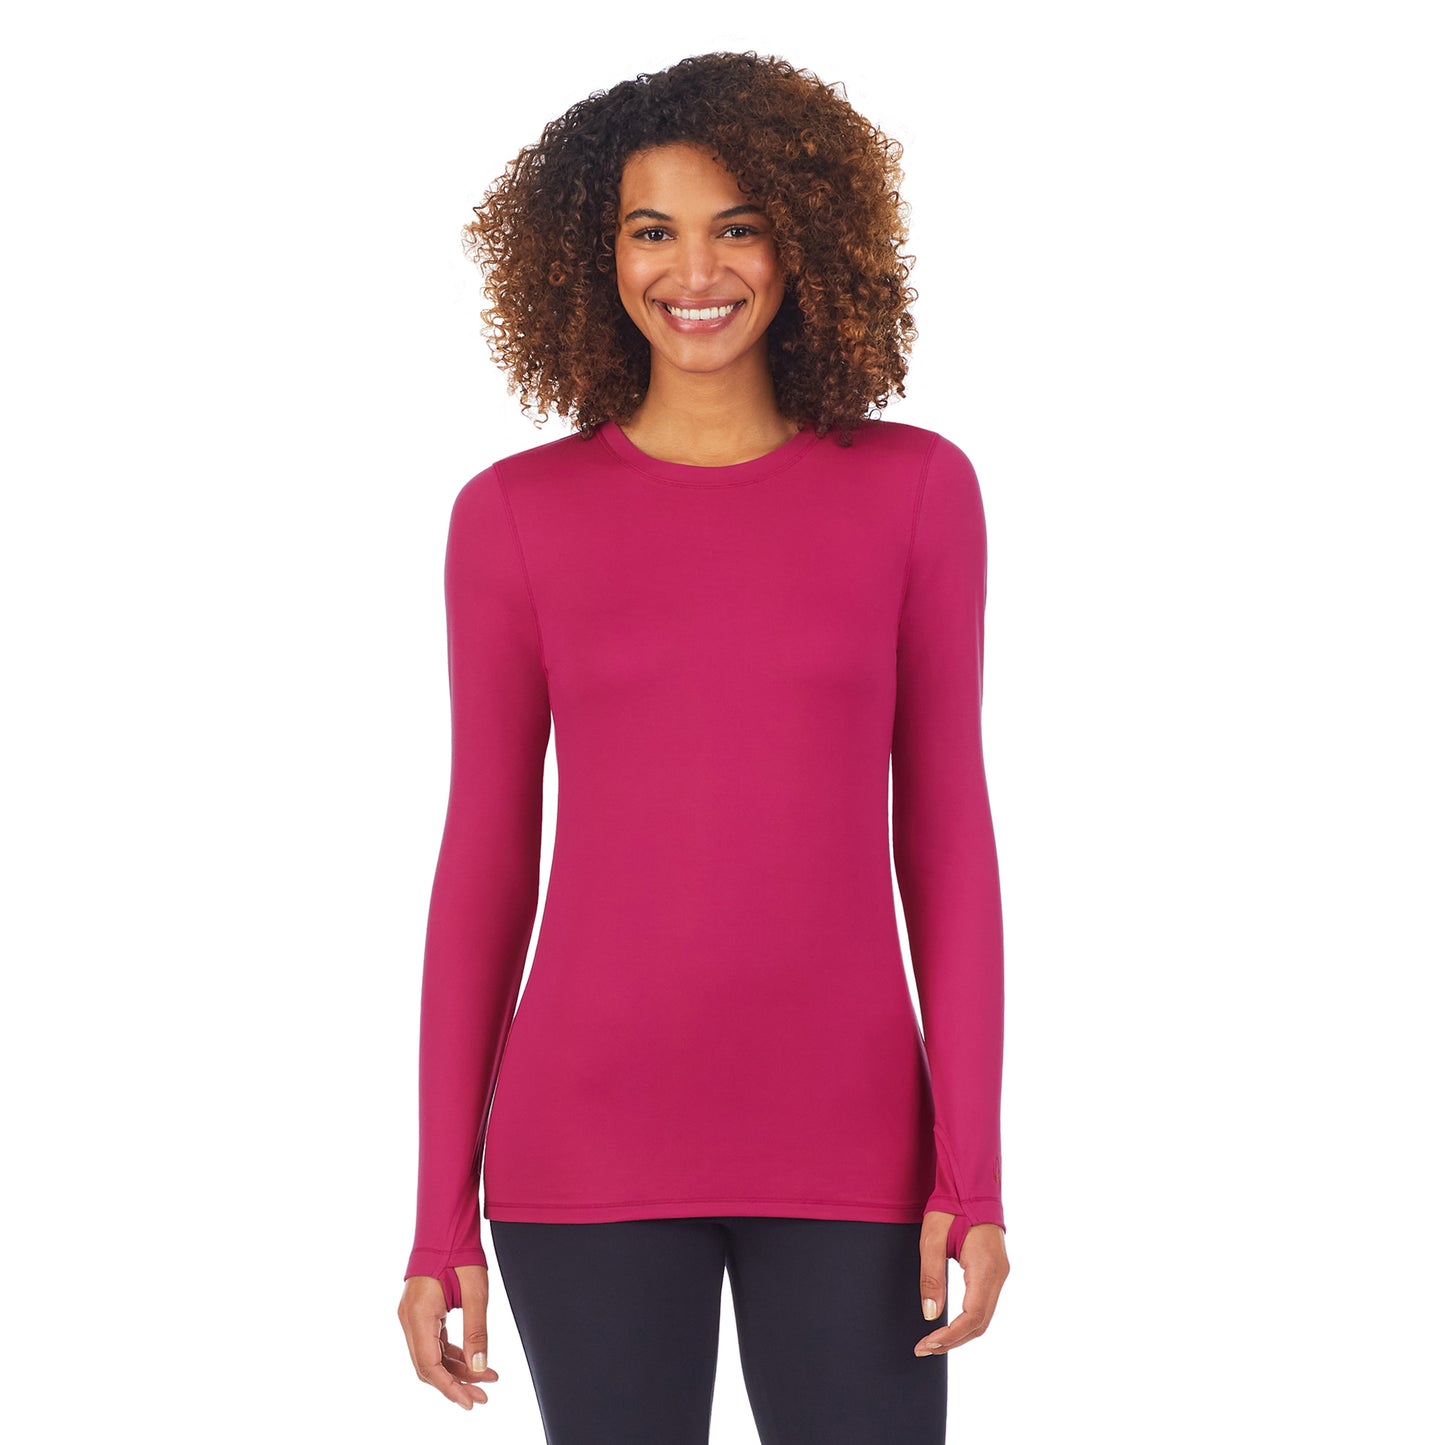 Magenta; Model is wearing size S. She is 5'11", Bust 32", Waist 25", Hips 35".@Upper body of a lady wearing magenta long sleeve crew.